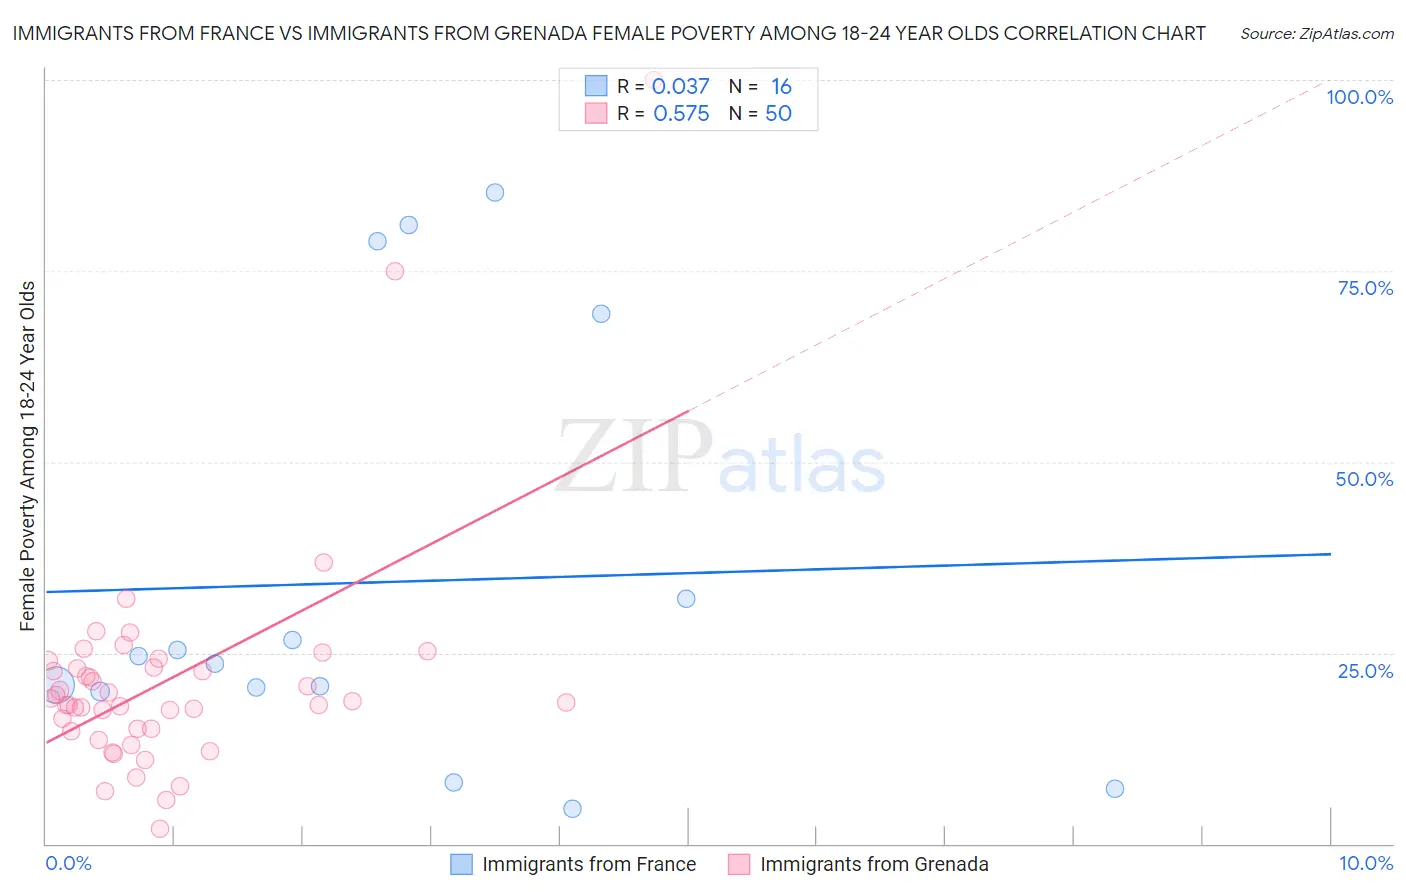 Immigrants from France vs Immigrants from Grenada Female Poverty Among 18-24 Year Olds